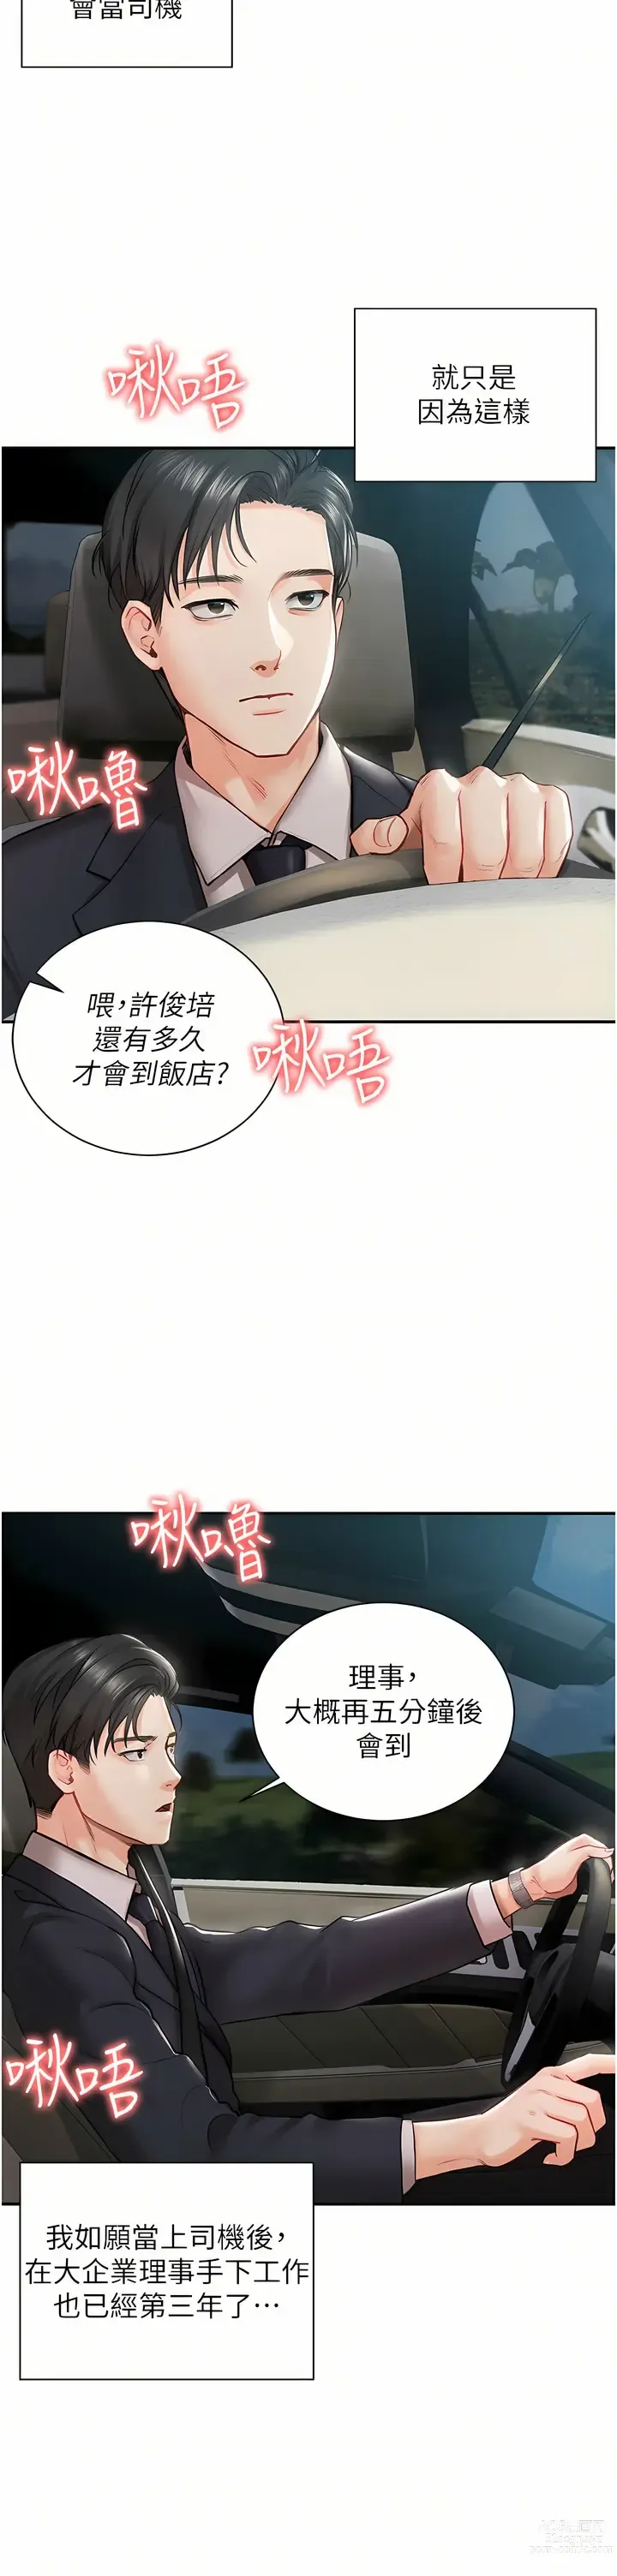 Page 3 of manga 私宅女主人／Hyeonjung’s Residence